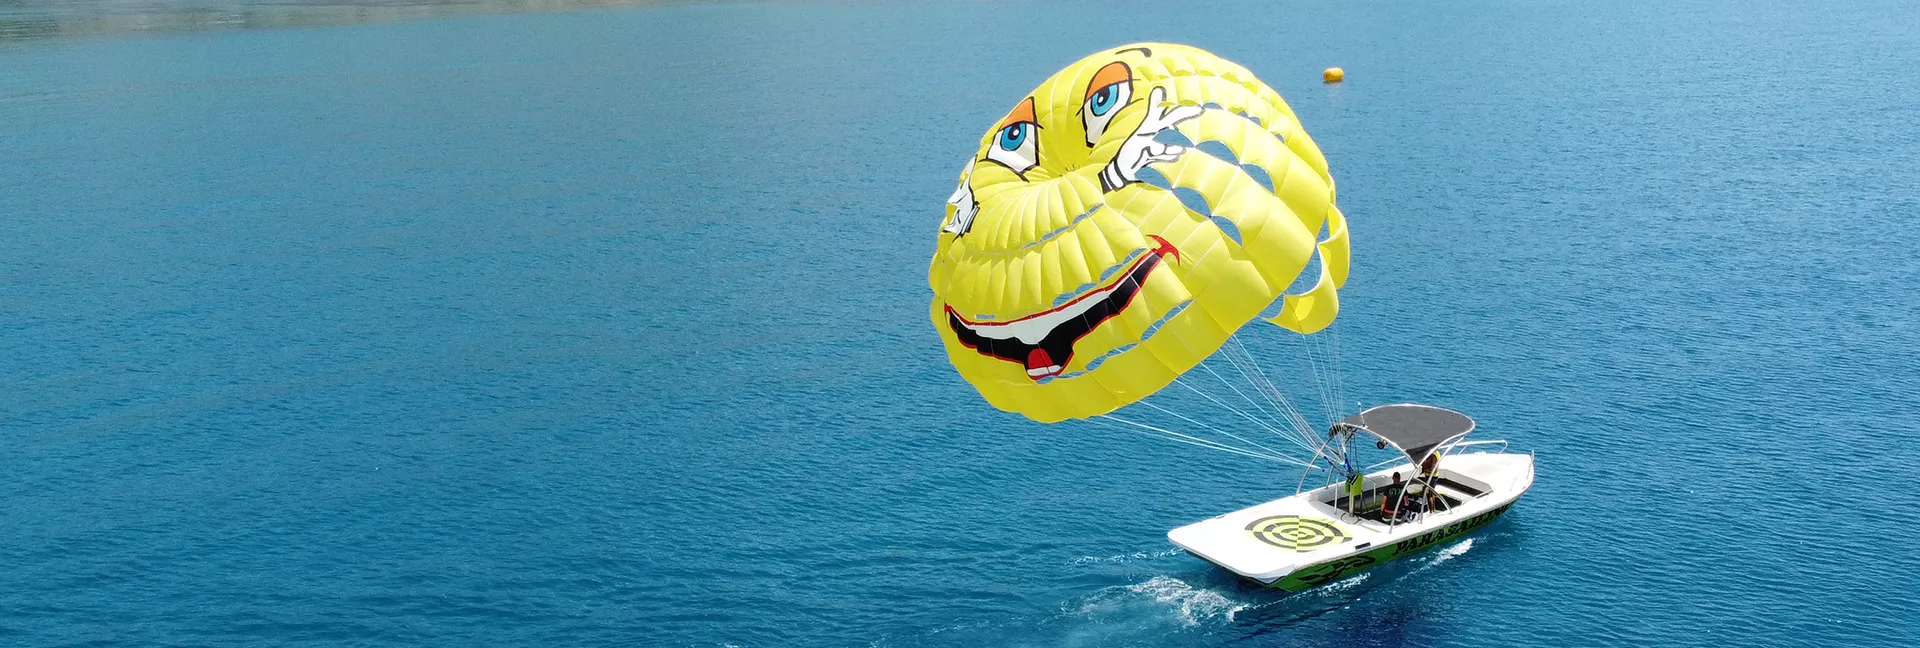 Water Sports Rodos - Action in Greece, Europe | Parasailing,Jet Skiing,Speedboats - Rated 1.1